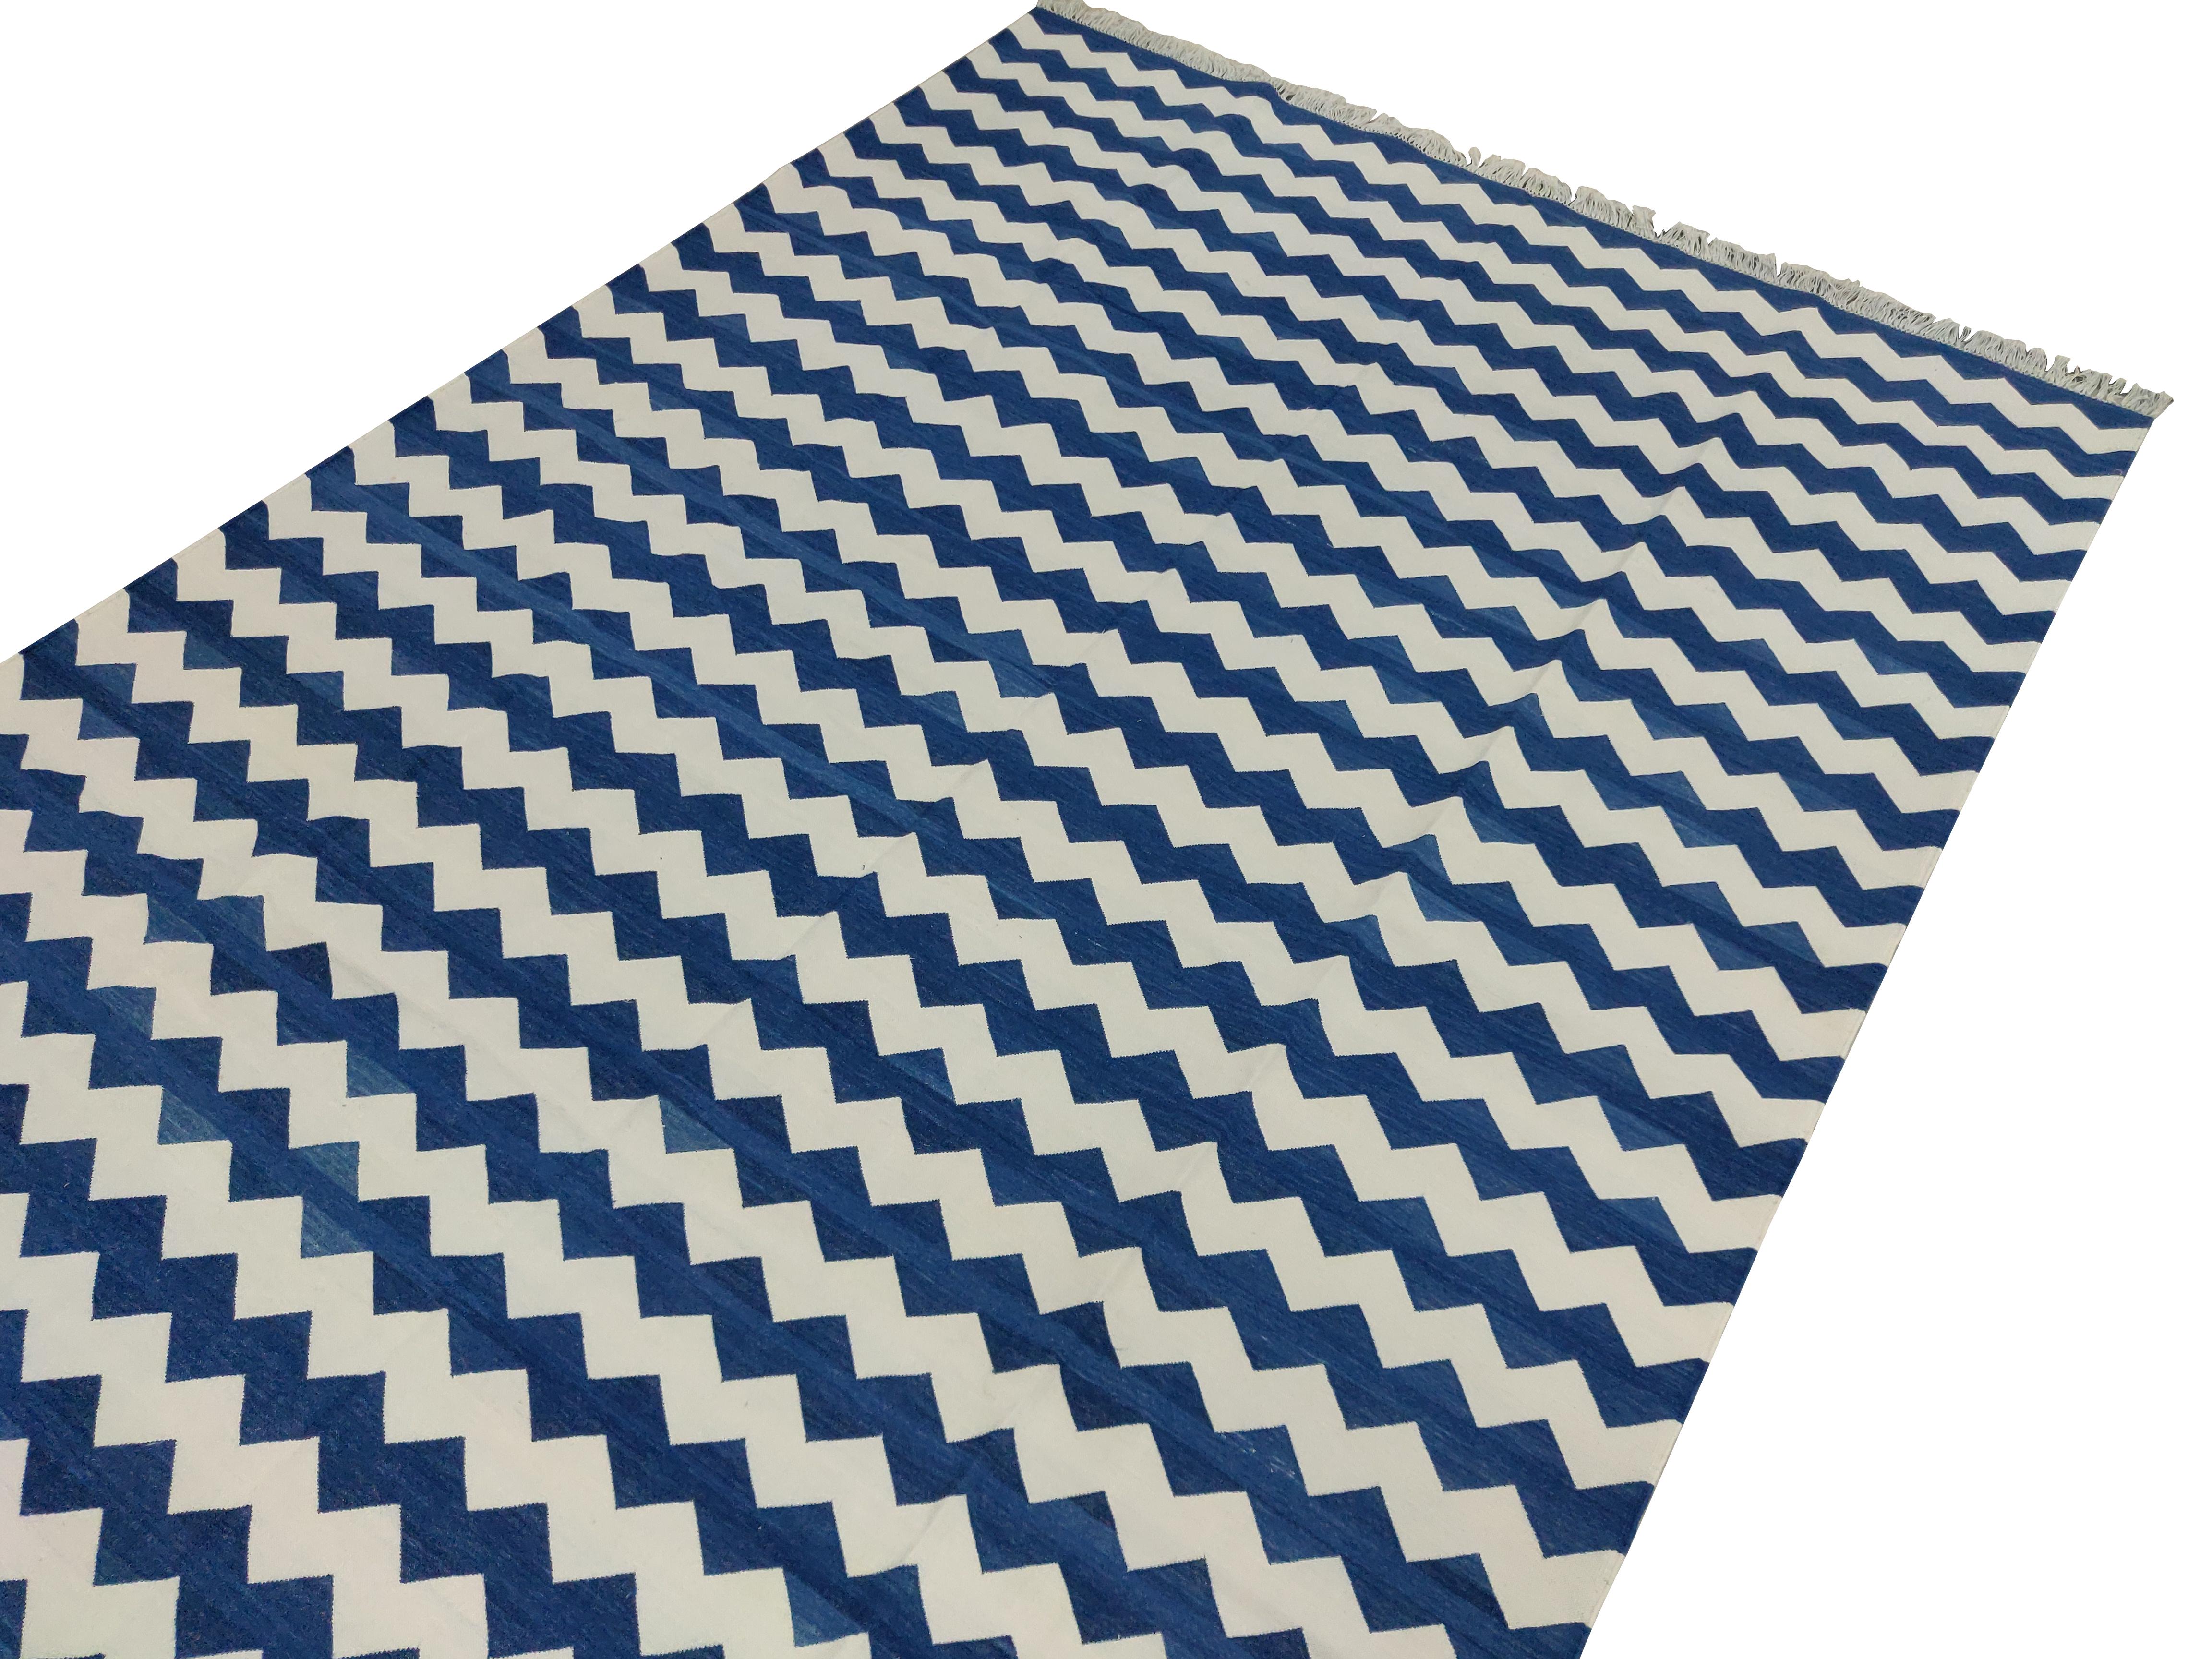 Indian Handmade Cotton Area Flat Weave Rug, 6x9 Blue And White Zig Zag Striped Dhurrie For Sale